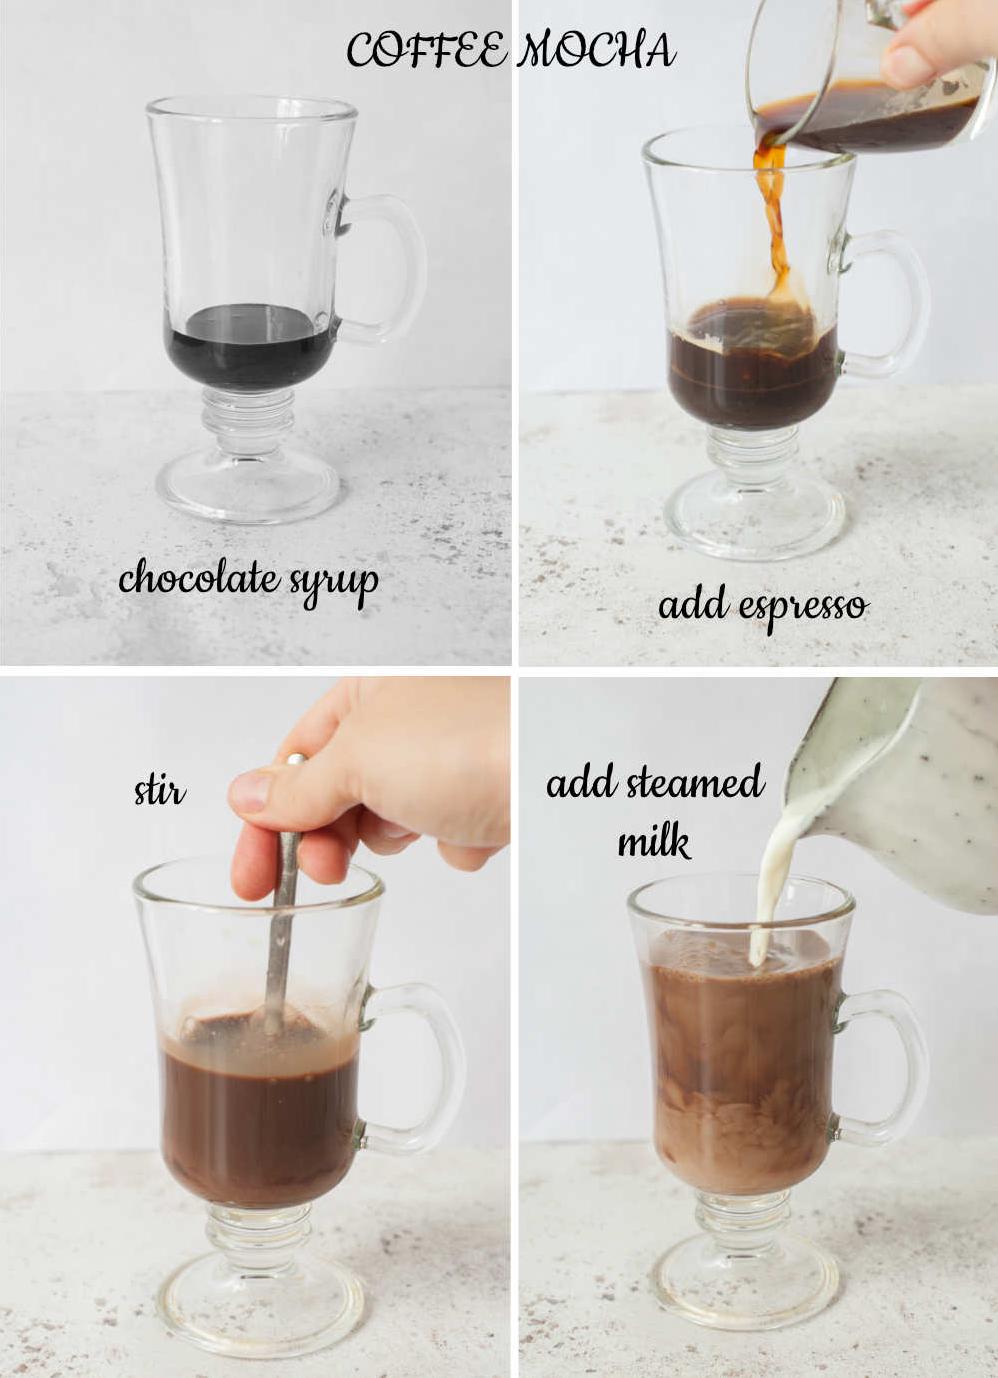  Get your caffeine and chocolate fix with this delicious easy mocha coffee recipe! ☕🍫